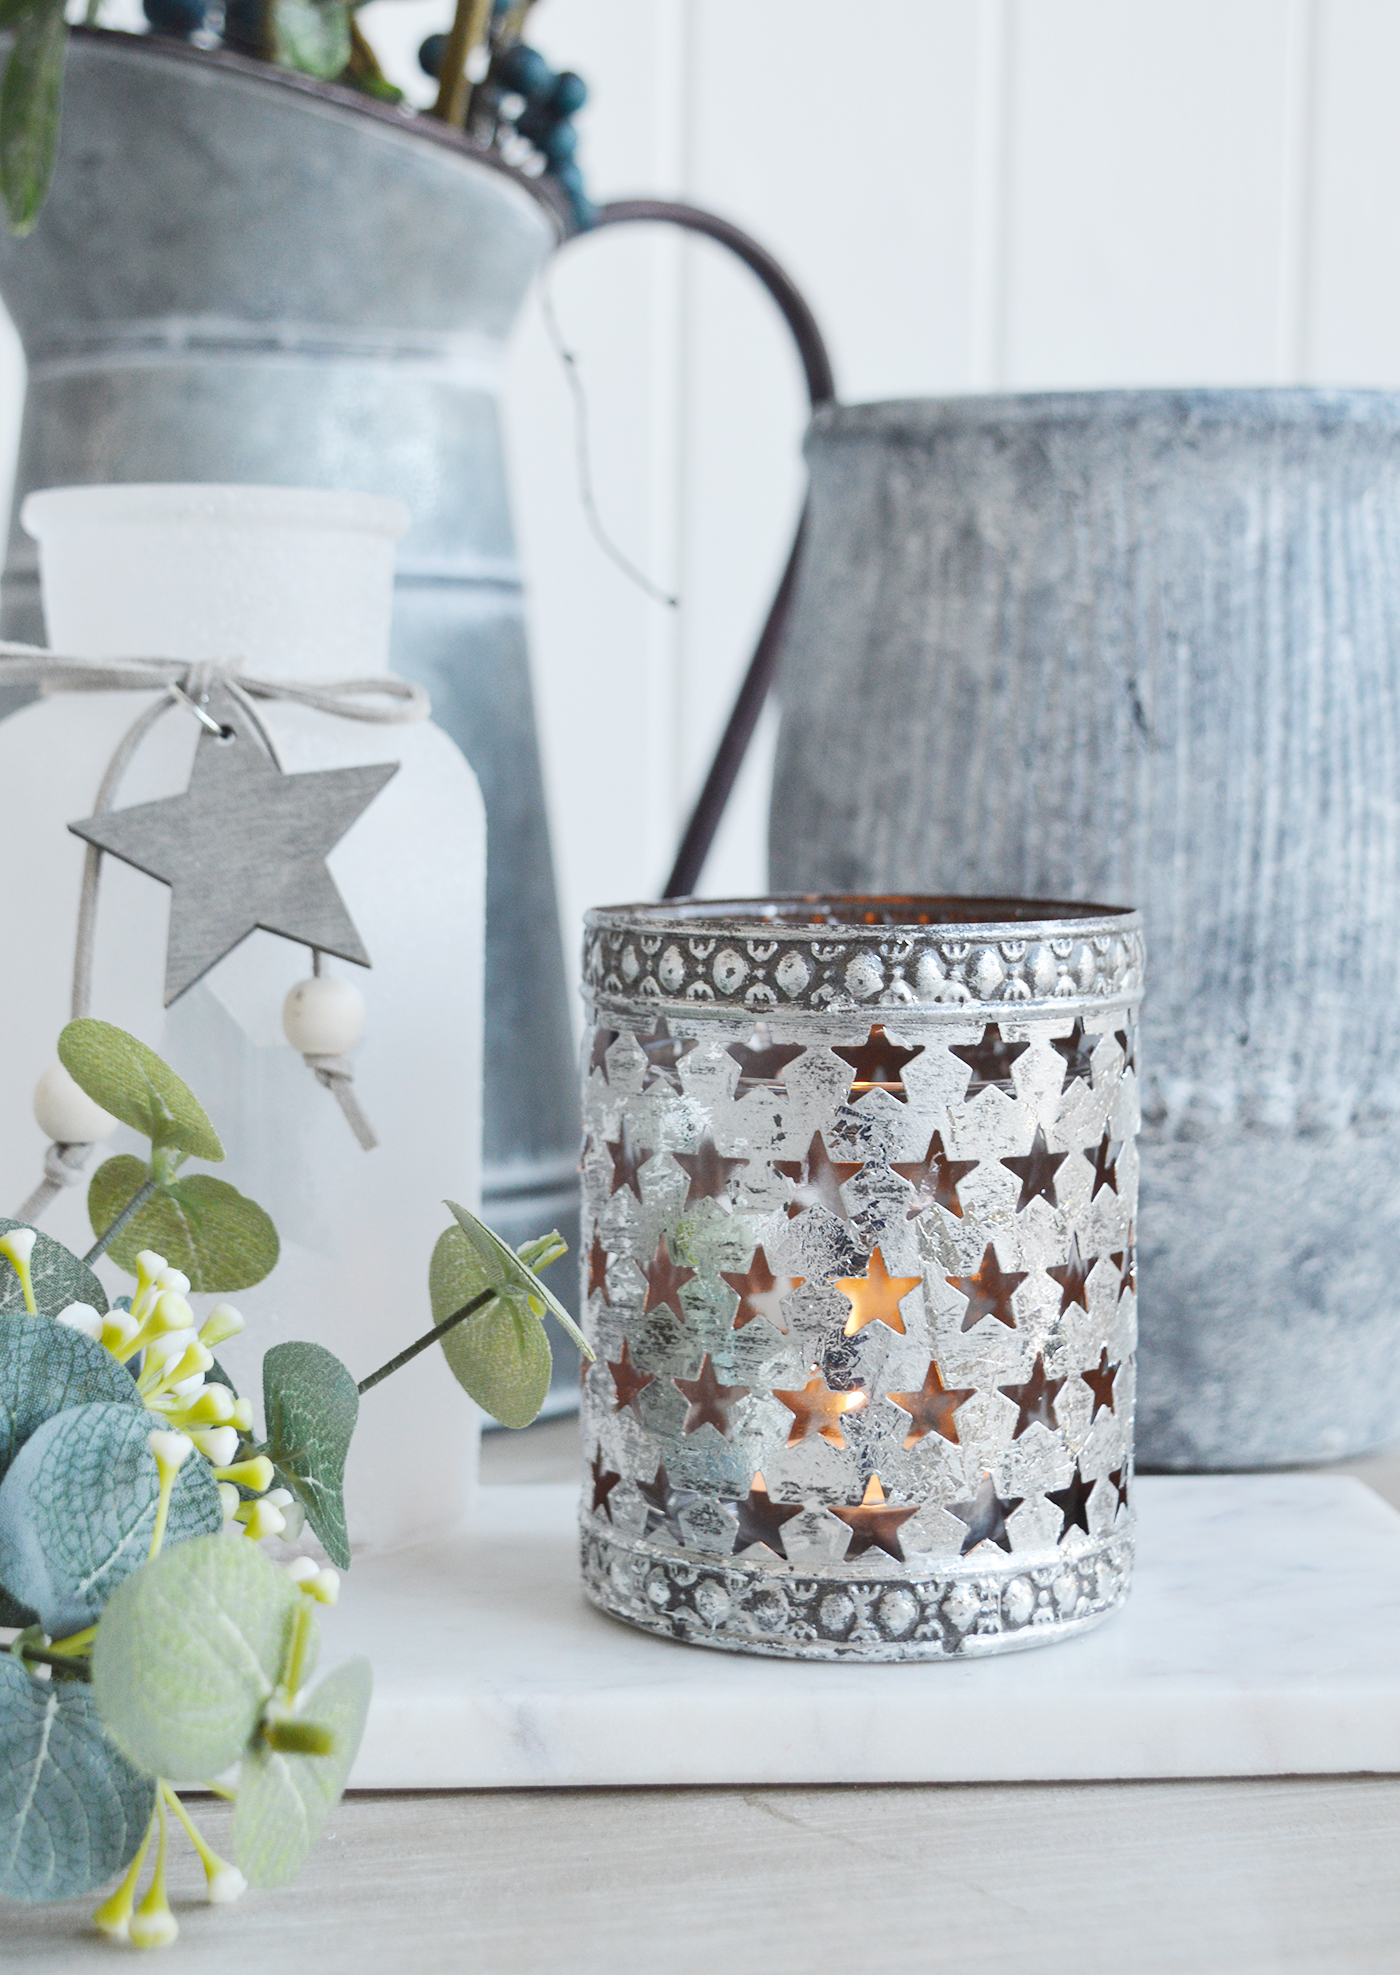 A star candle holder from The White Lighthouse furniture and accessories. New England style home decoor and accessories for coastal, country and city home interiors